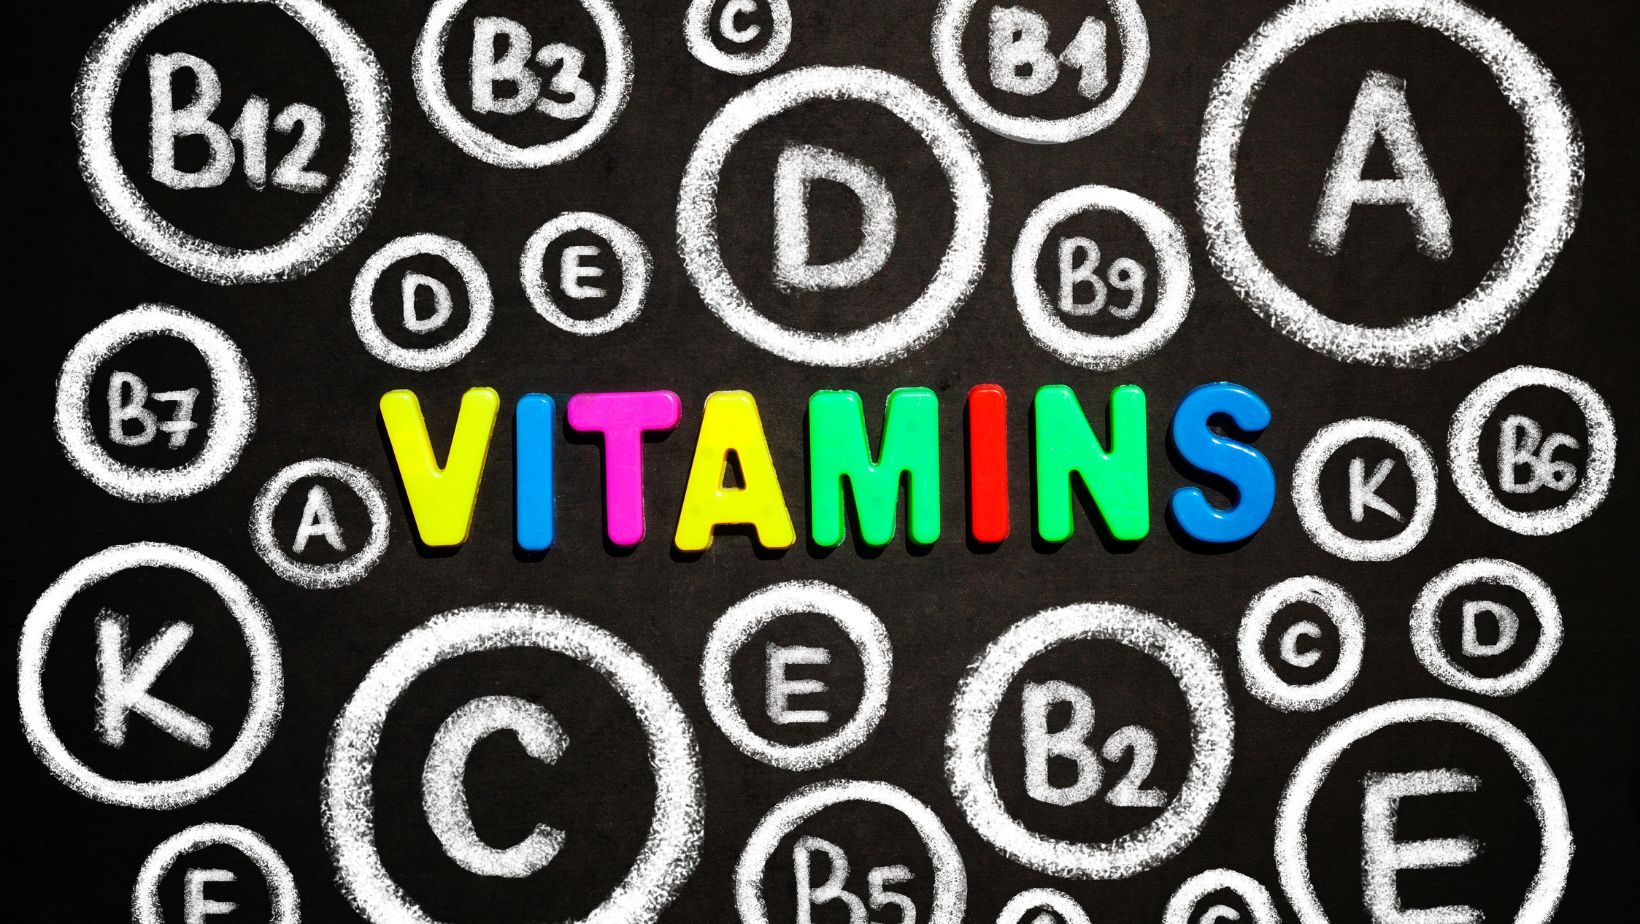 which of the following statements accurately describes vitamins?